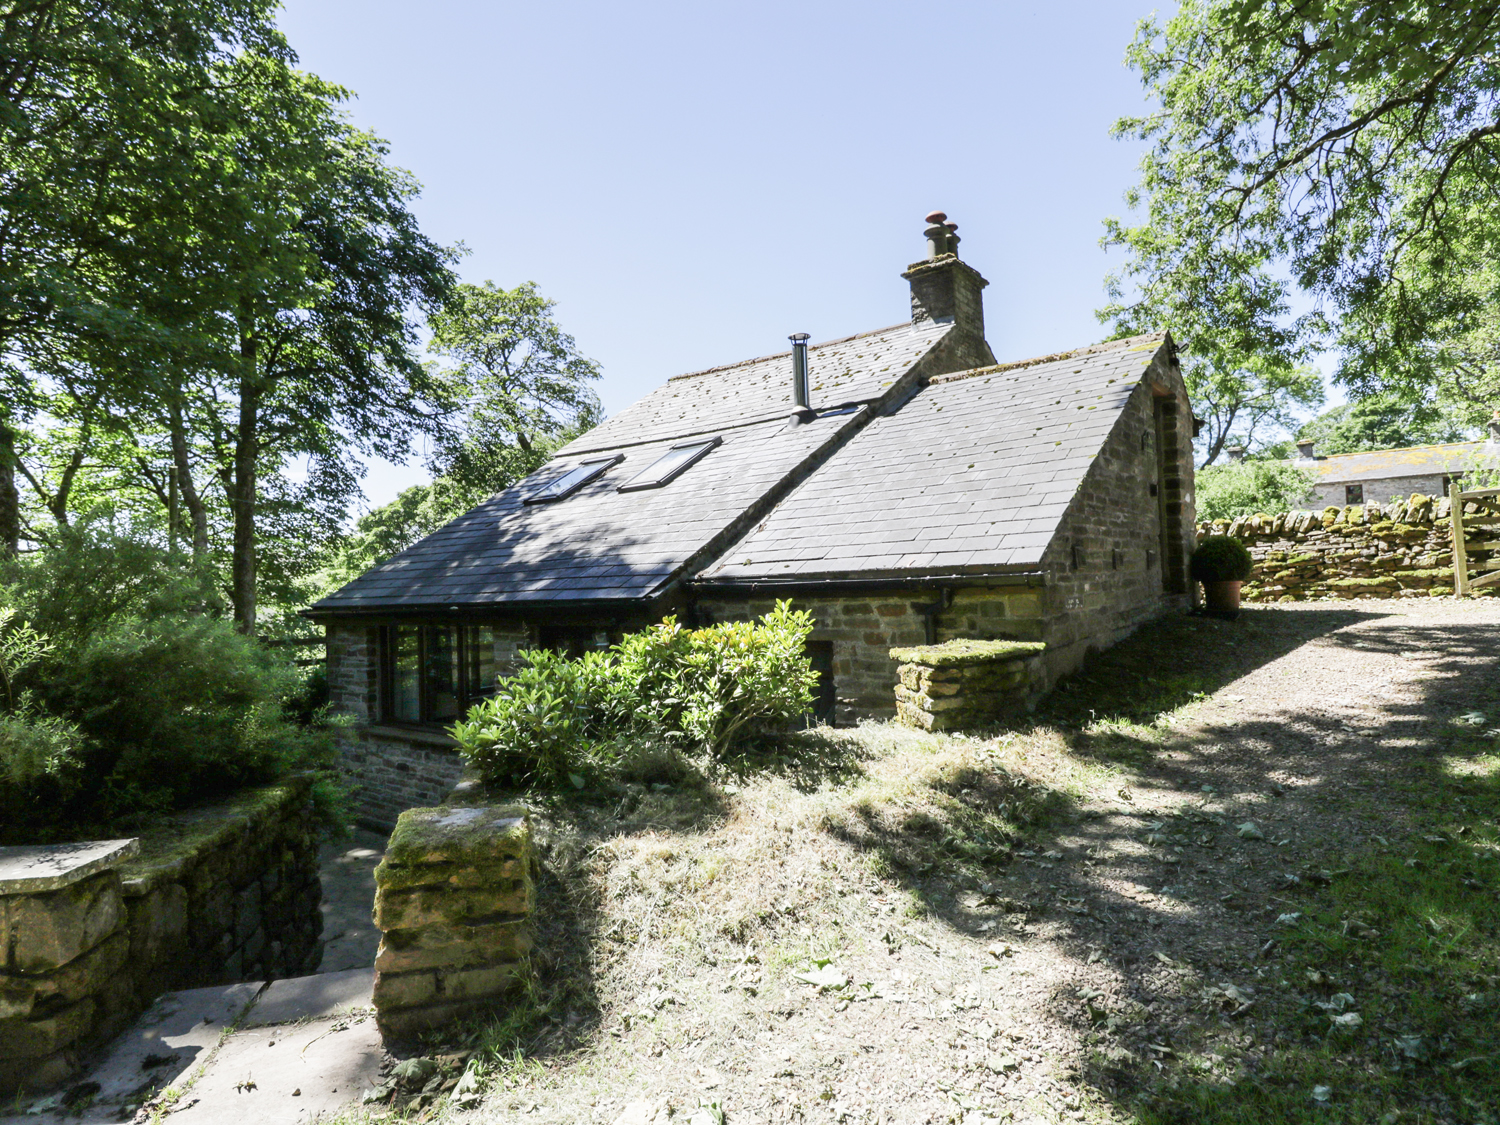 Bothy, The Lake District and Cumbria